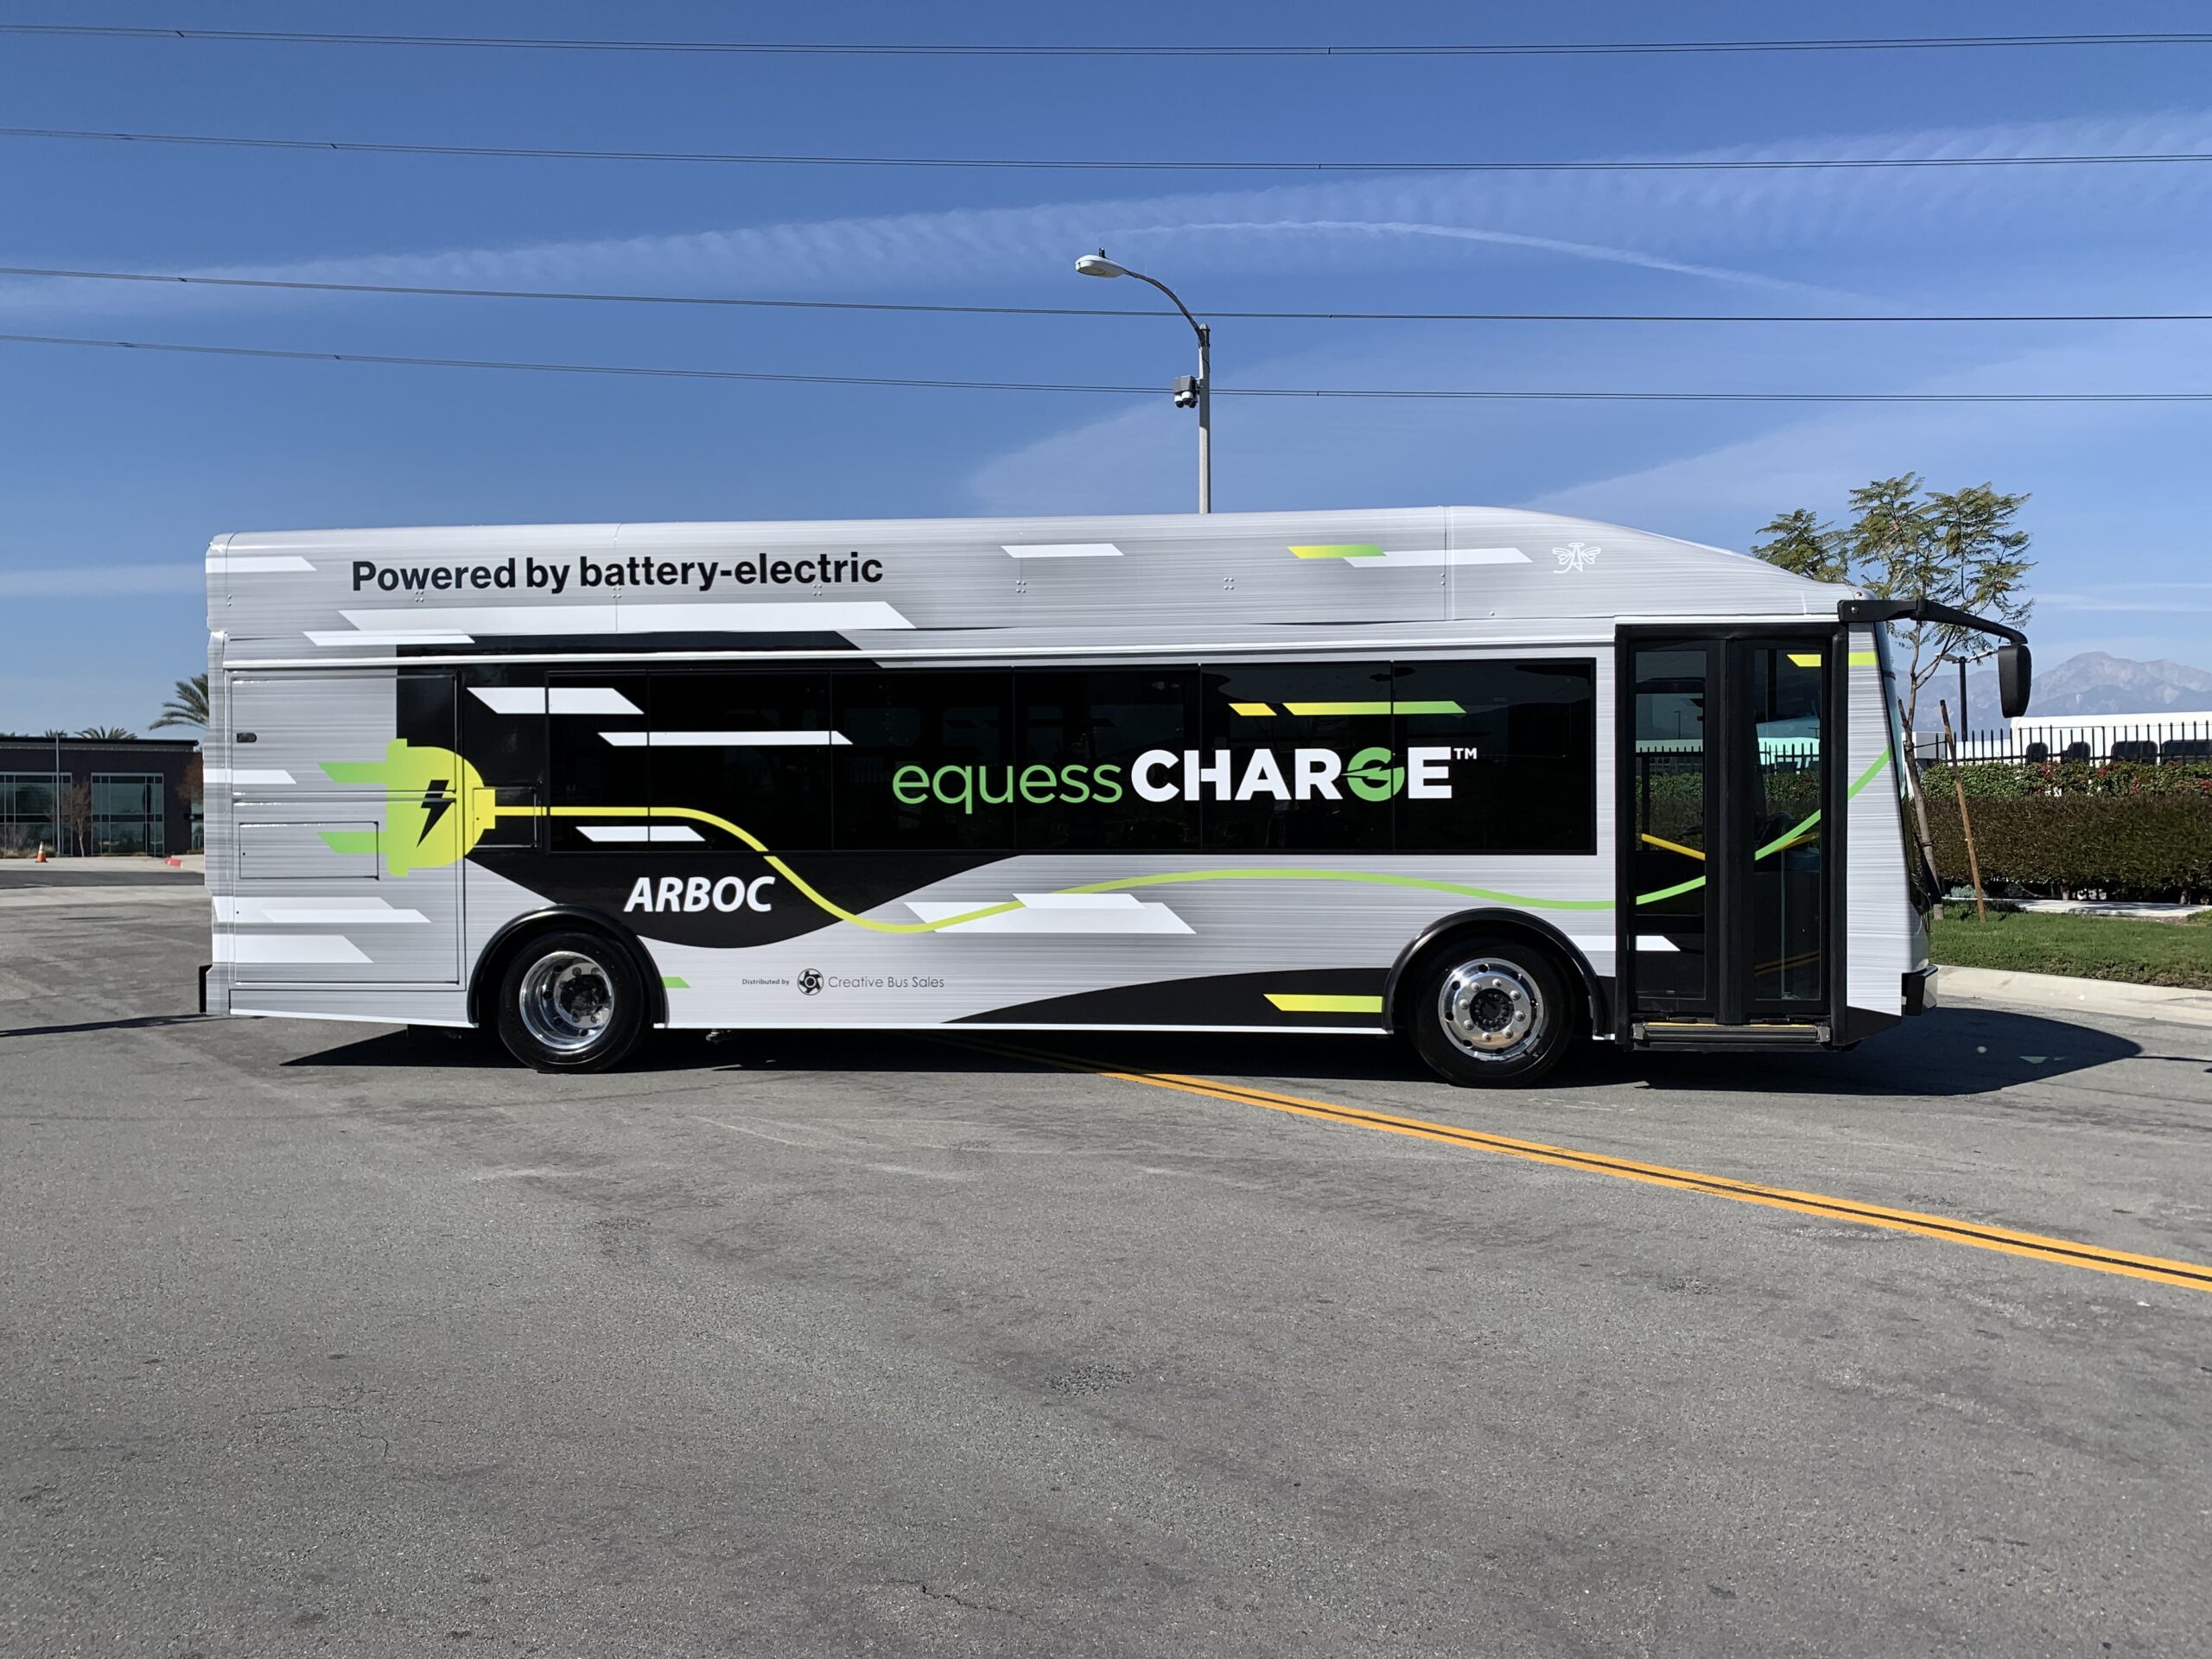 A 2021 white and black ARBOC Equess CHARGE electric bus parked in a parking lot.